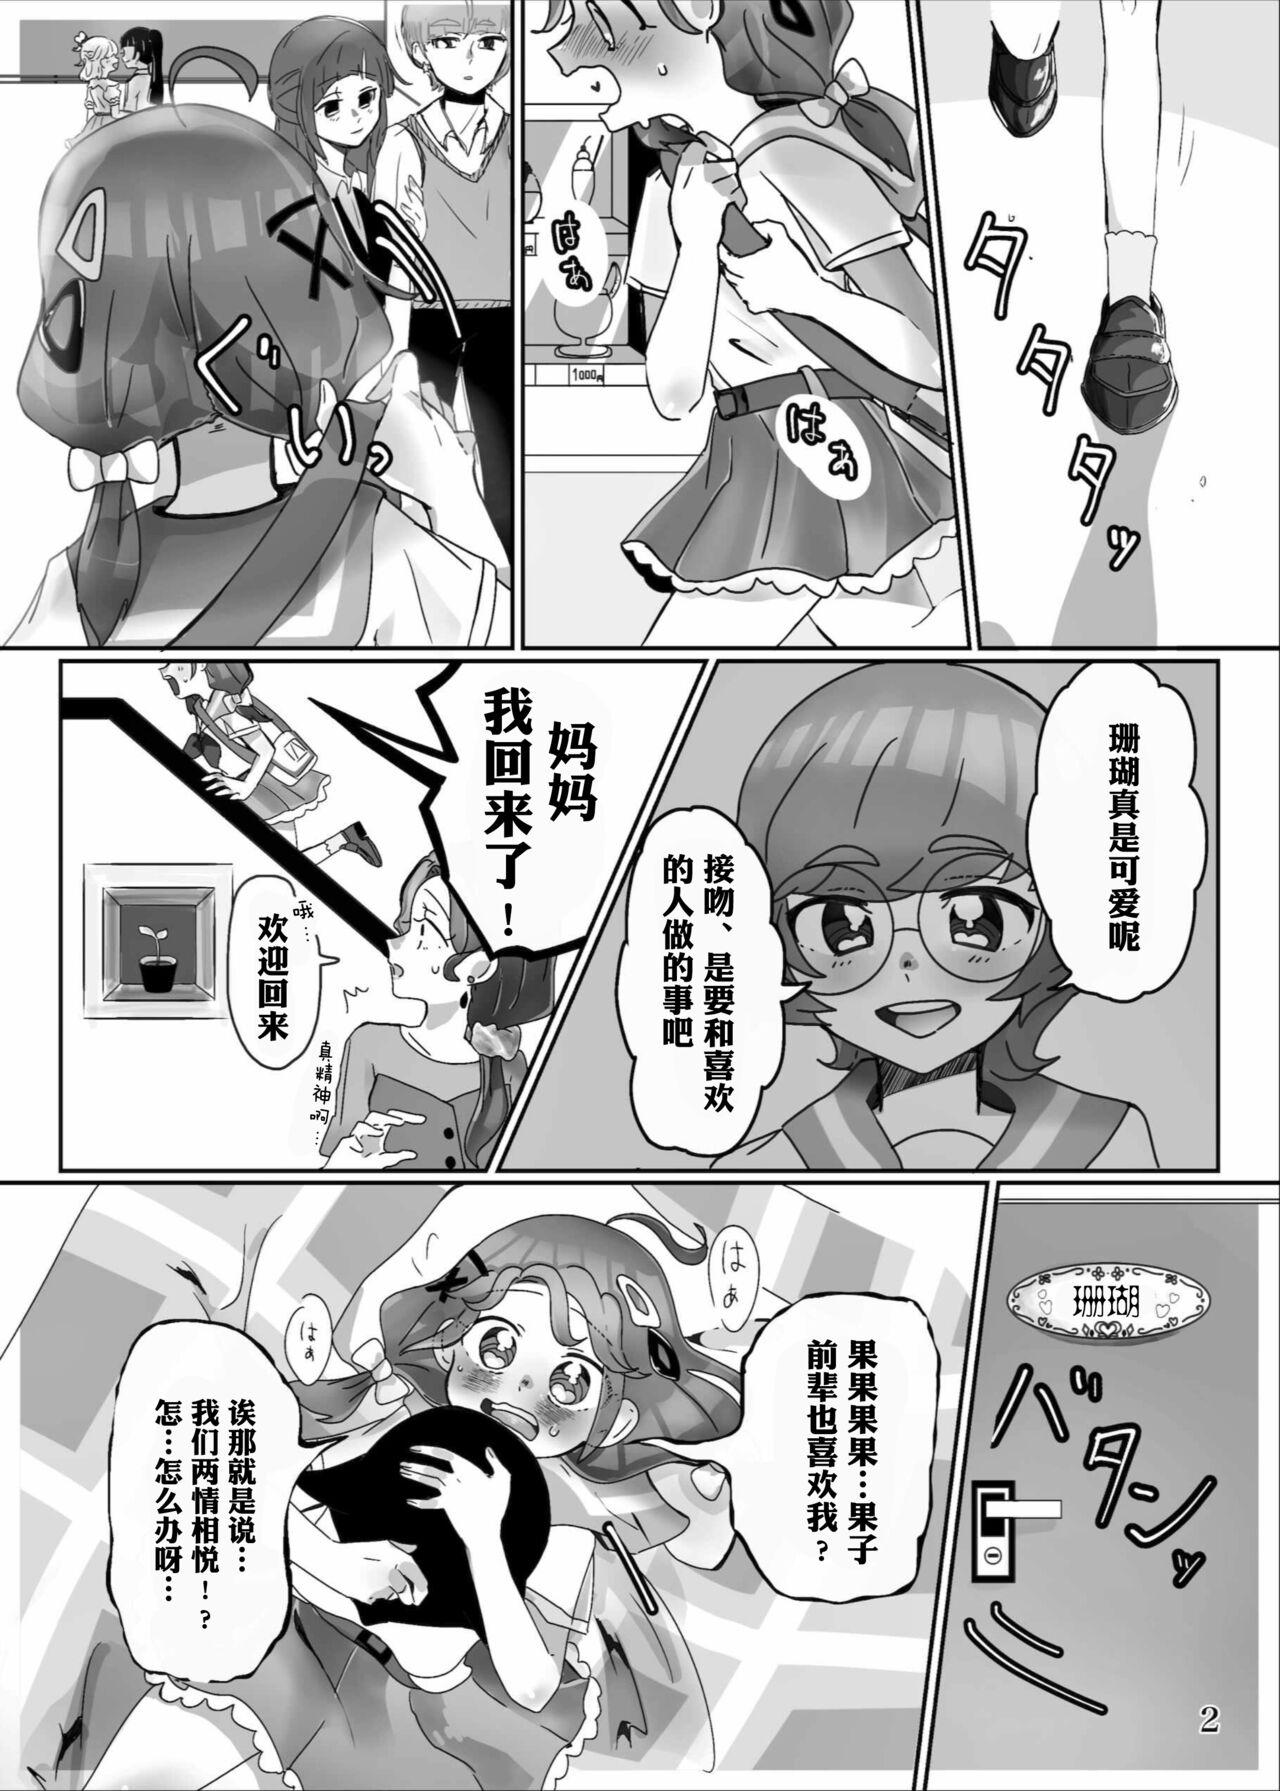 Van yaritaigotone do my best - Pretty cure Tropical rouge precure Cruising - Page 4